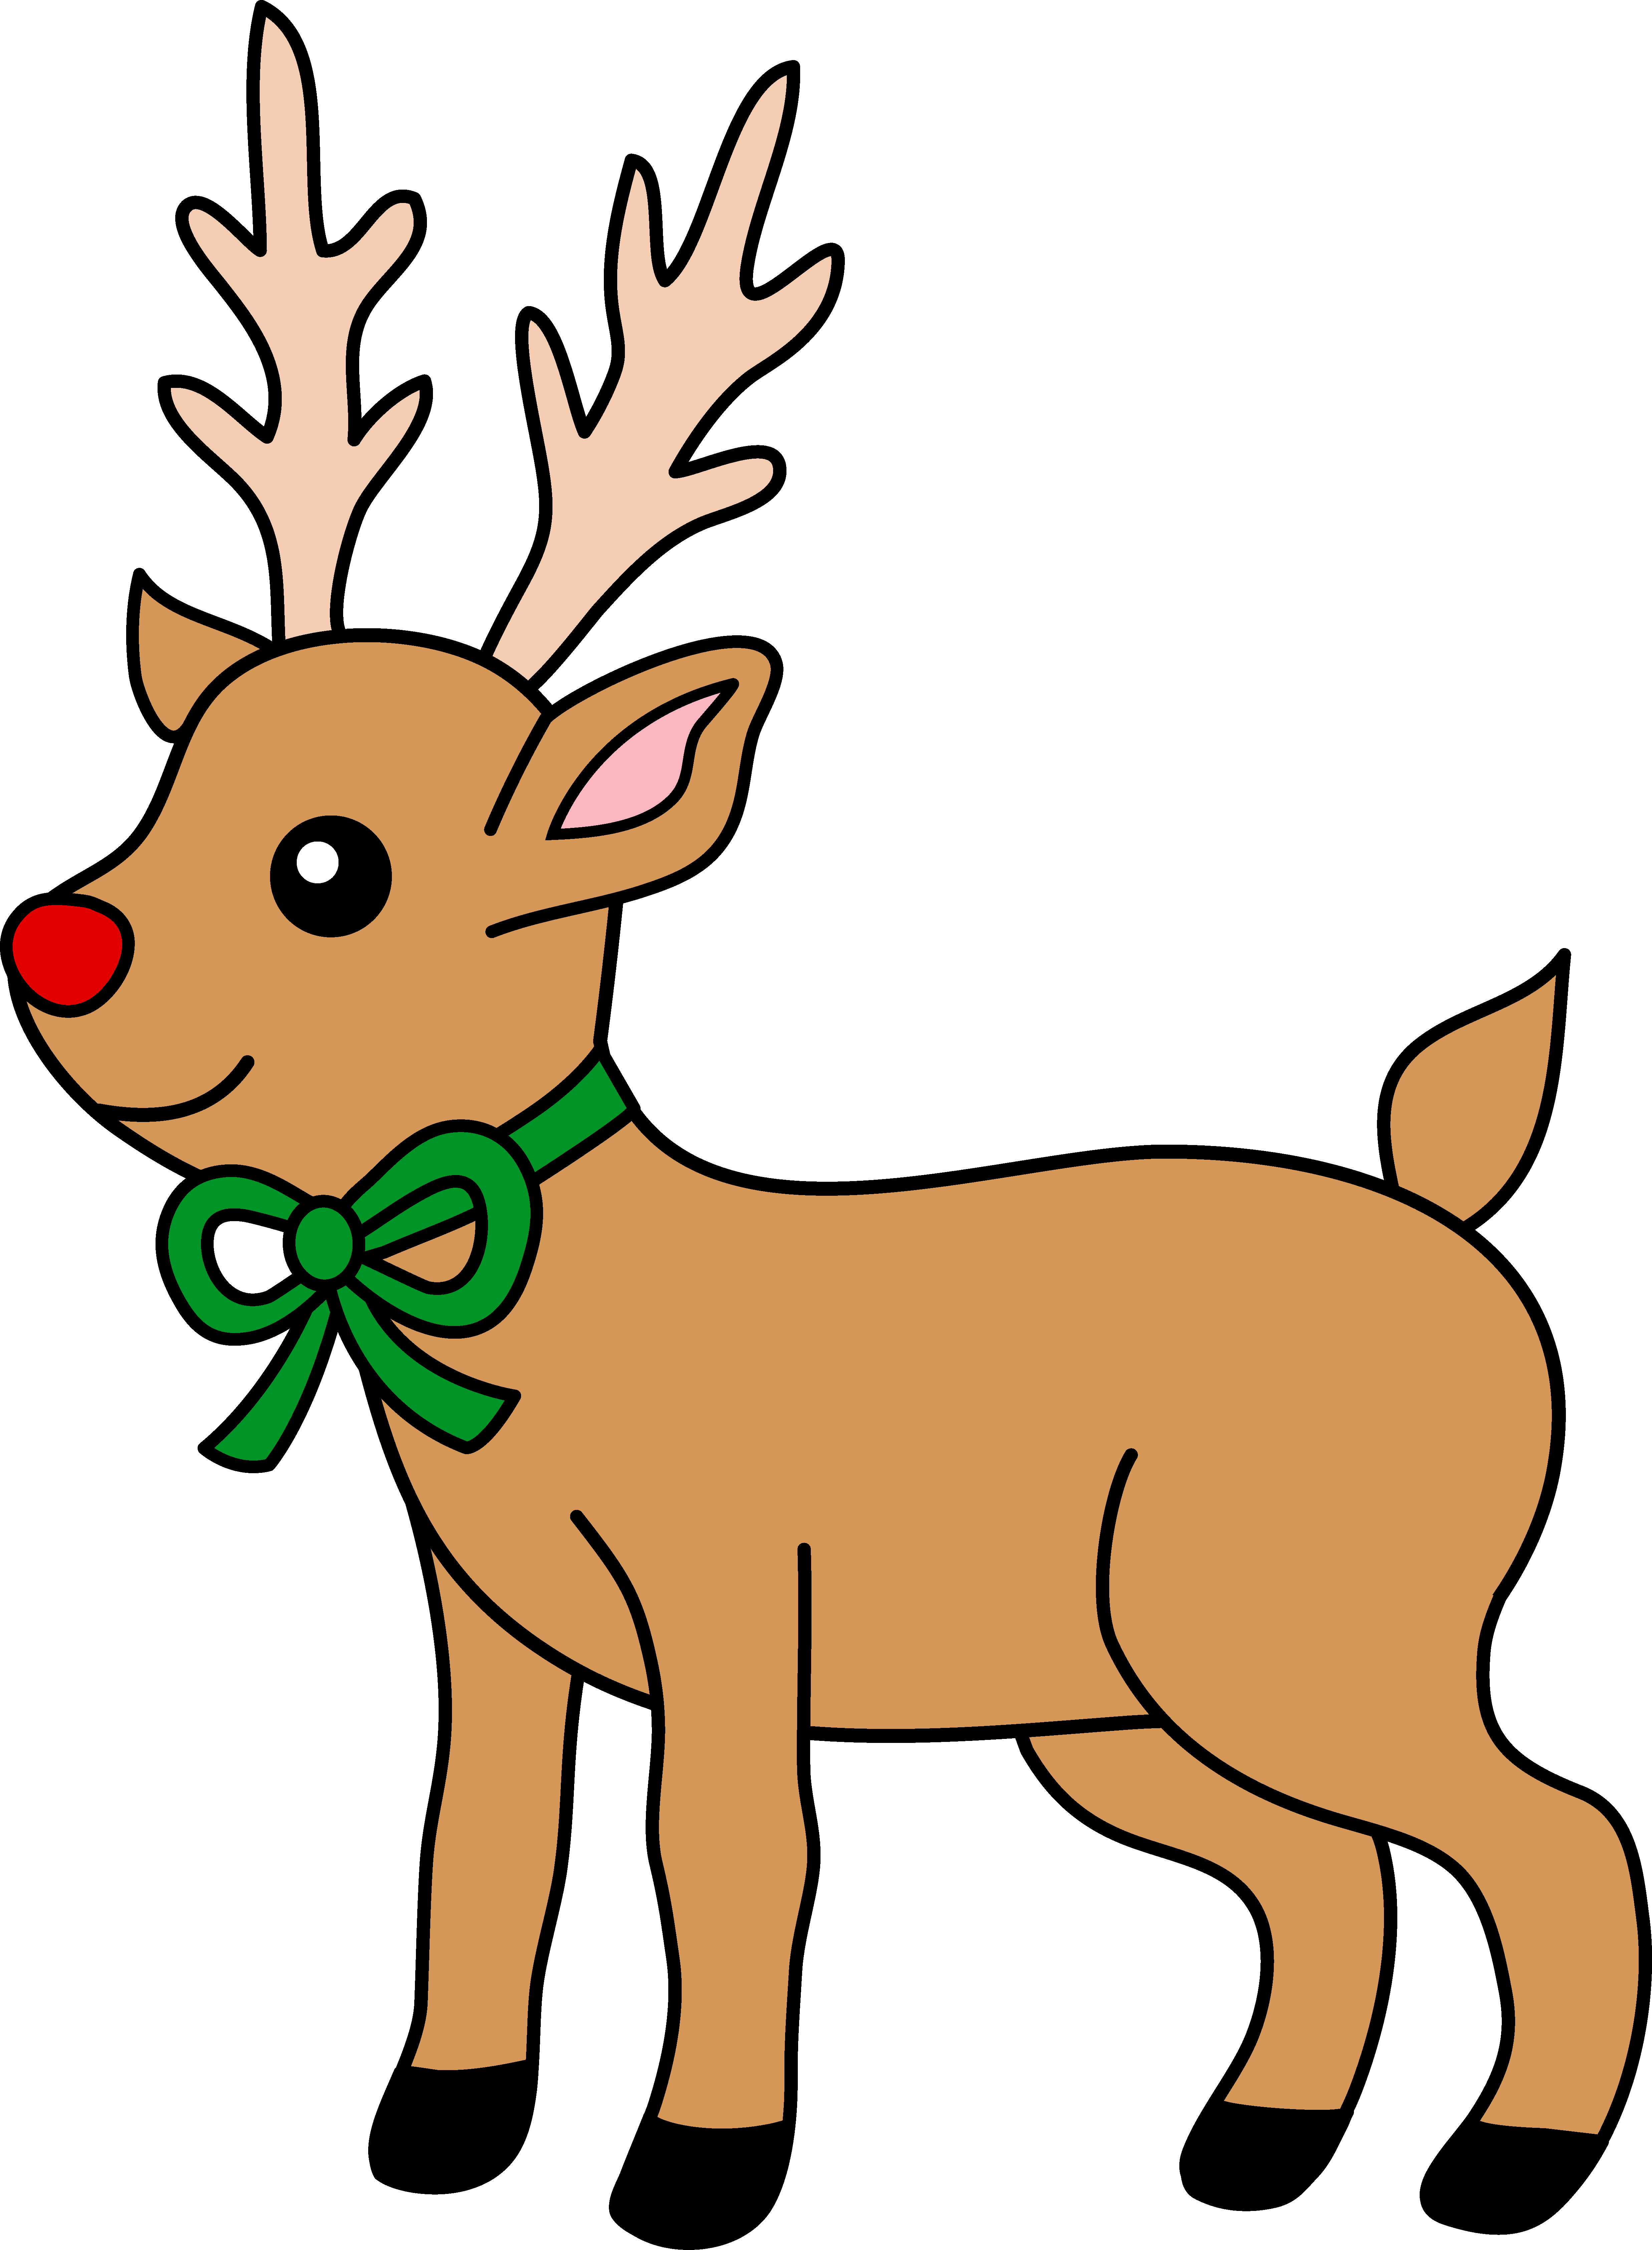 Free animated reindeer clipart